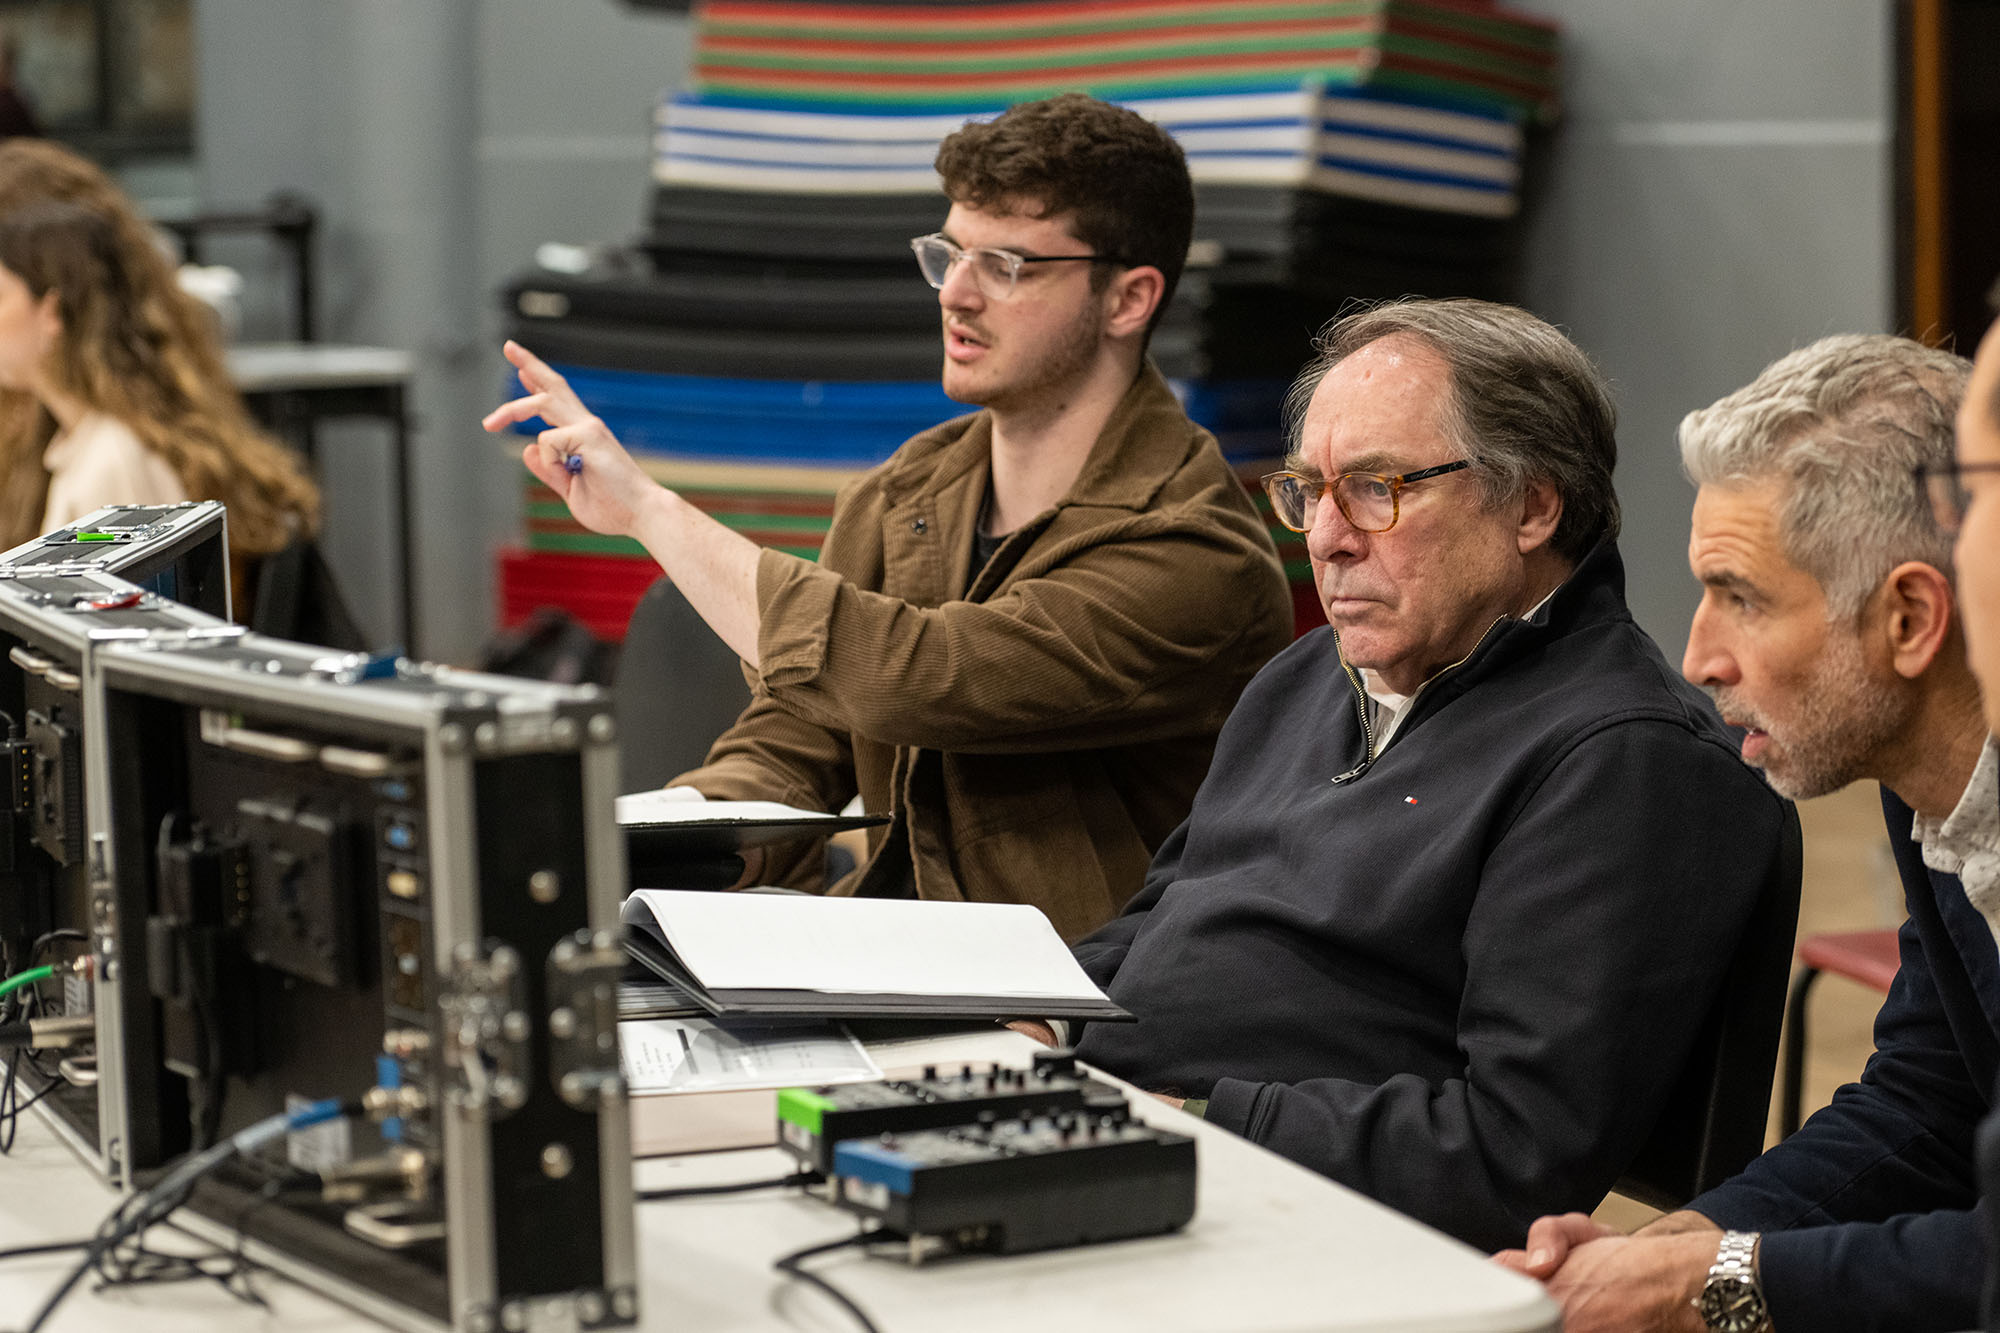 Photo: Director Eli Canter (left) and Paul Schneider, COM professor of film and television and department chair, discuss camera blocking during a rehearsal. A young man wearing glasses and a brown collared shirt points forward and speaks as an older man wearing glasses and a black collared shirt sits to his right. They both sit at a table with multiple mini screens in front of them.